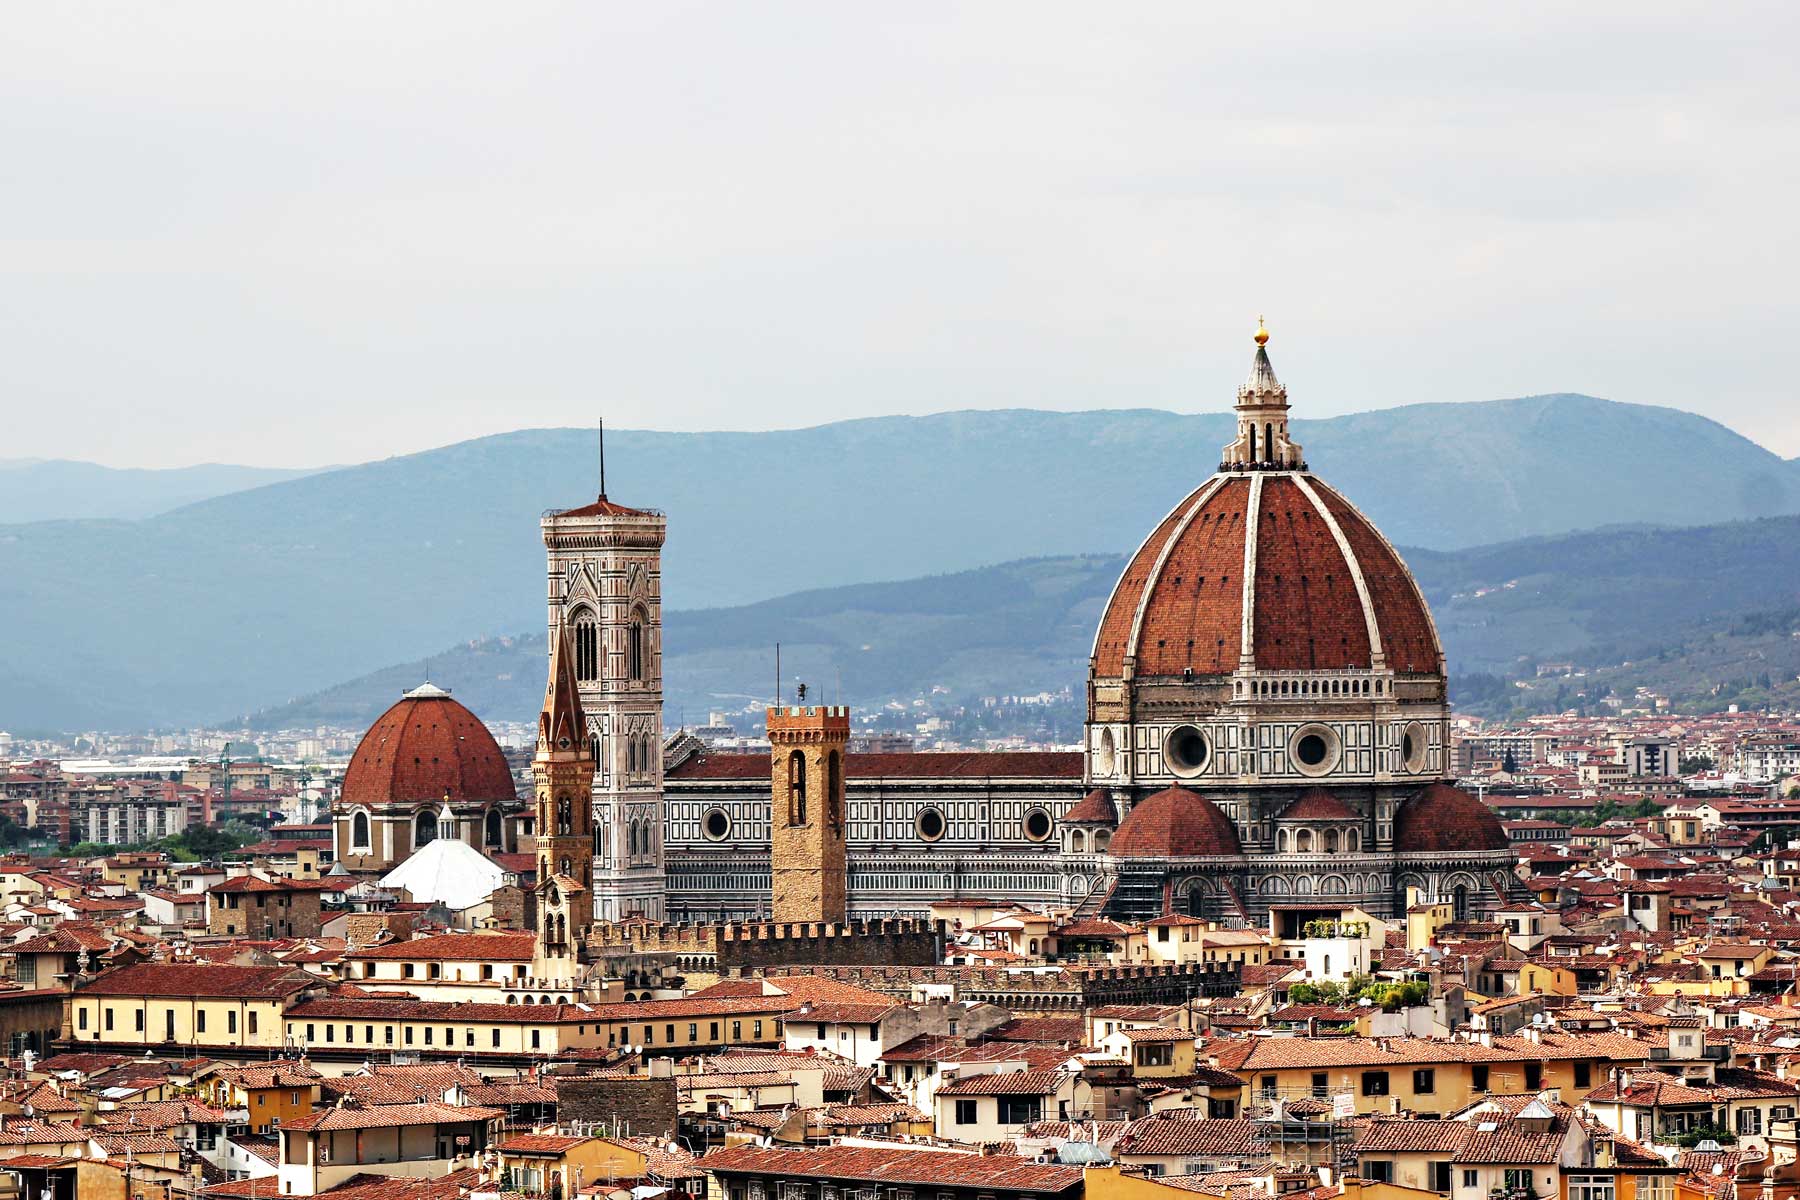 Student Blog: Becoming a Local in Florence